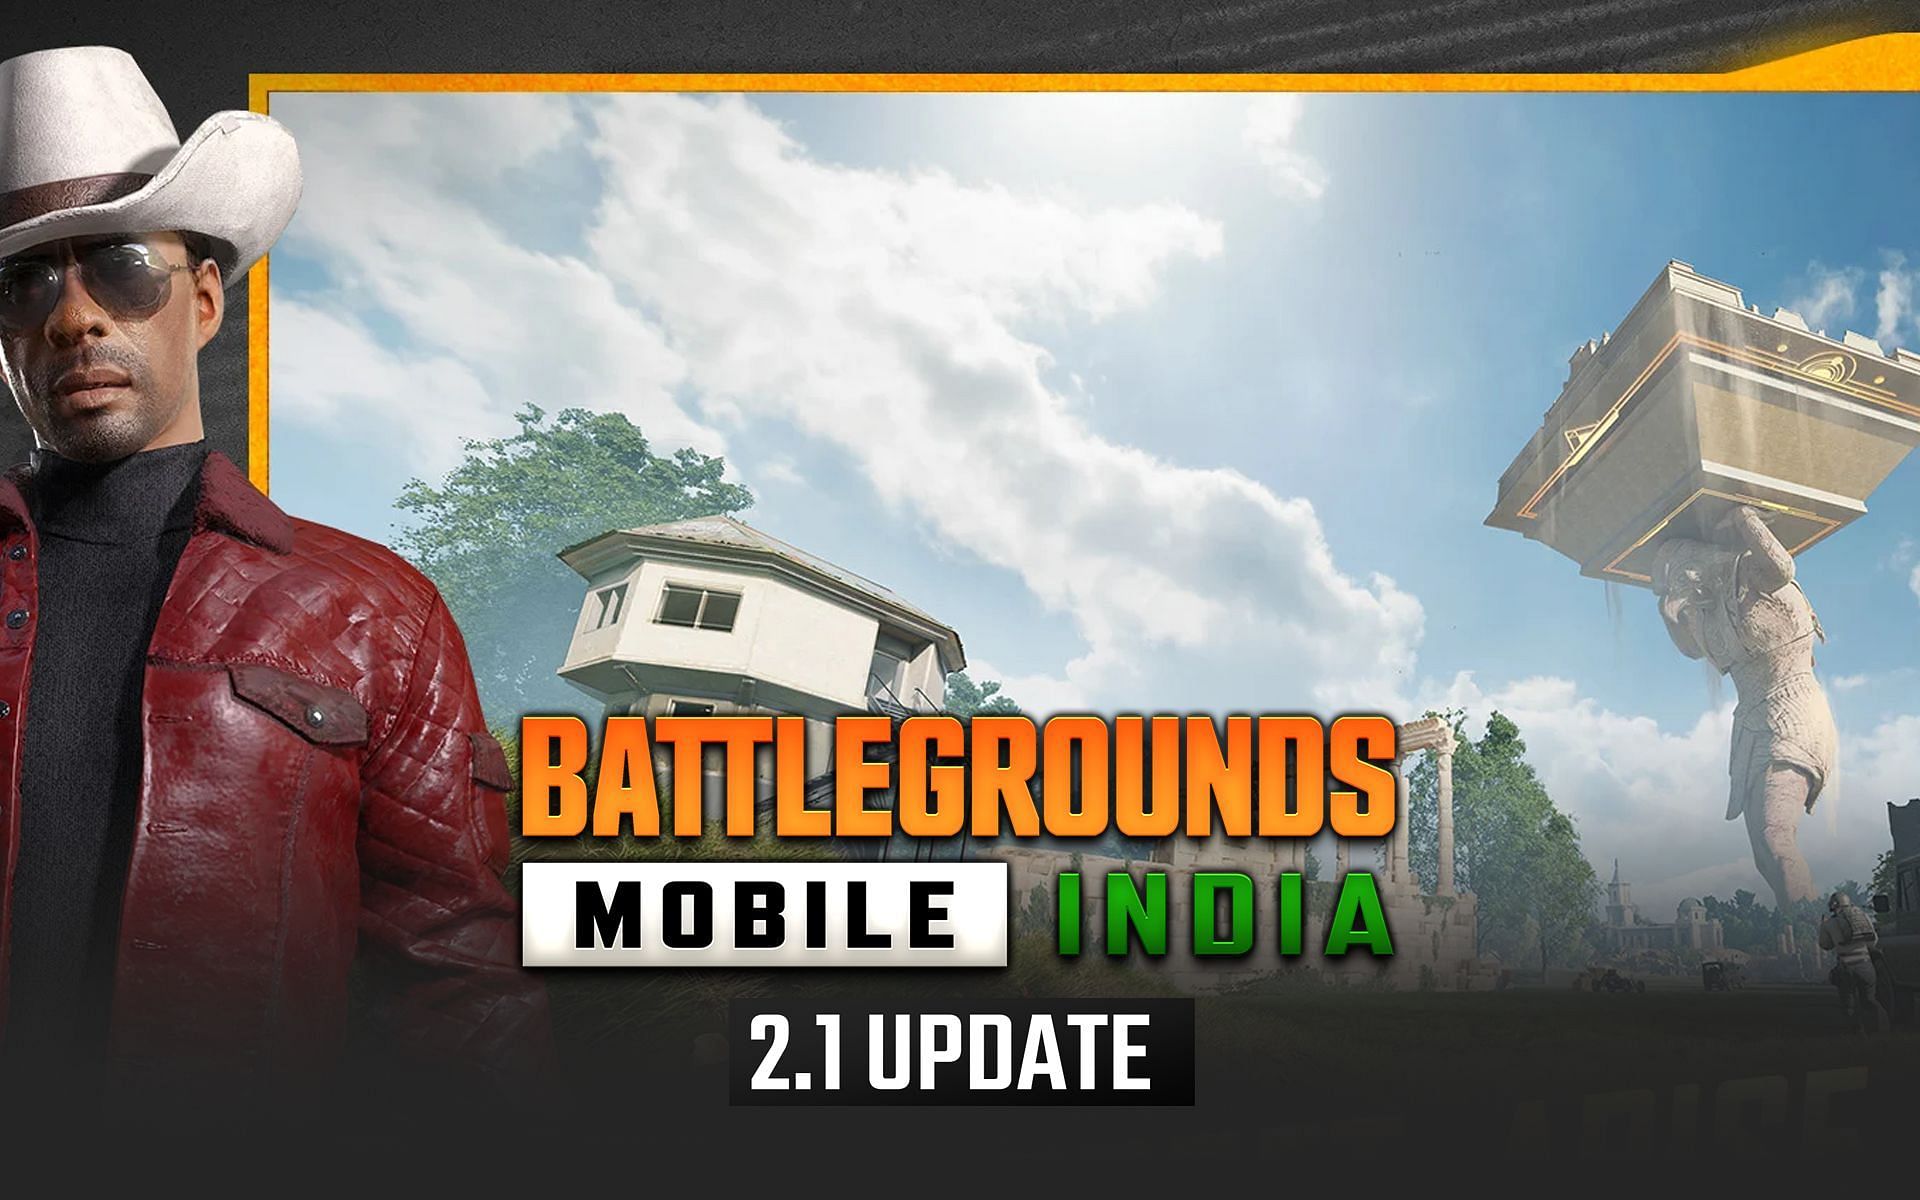 Android users can download BGMI&#039;s latest 2.1 update using the APK file or the Google Play Store (Image via Sportskeeda)